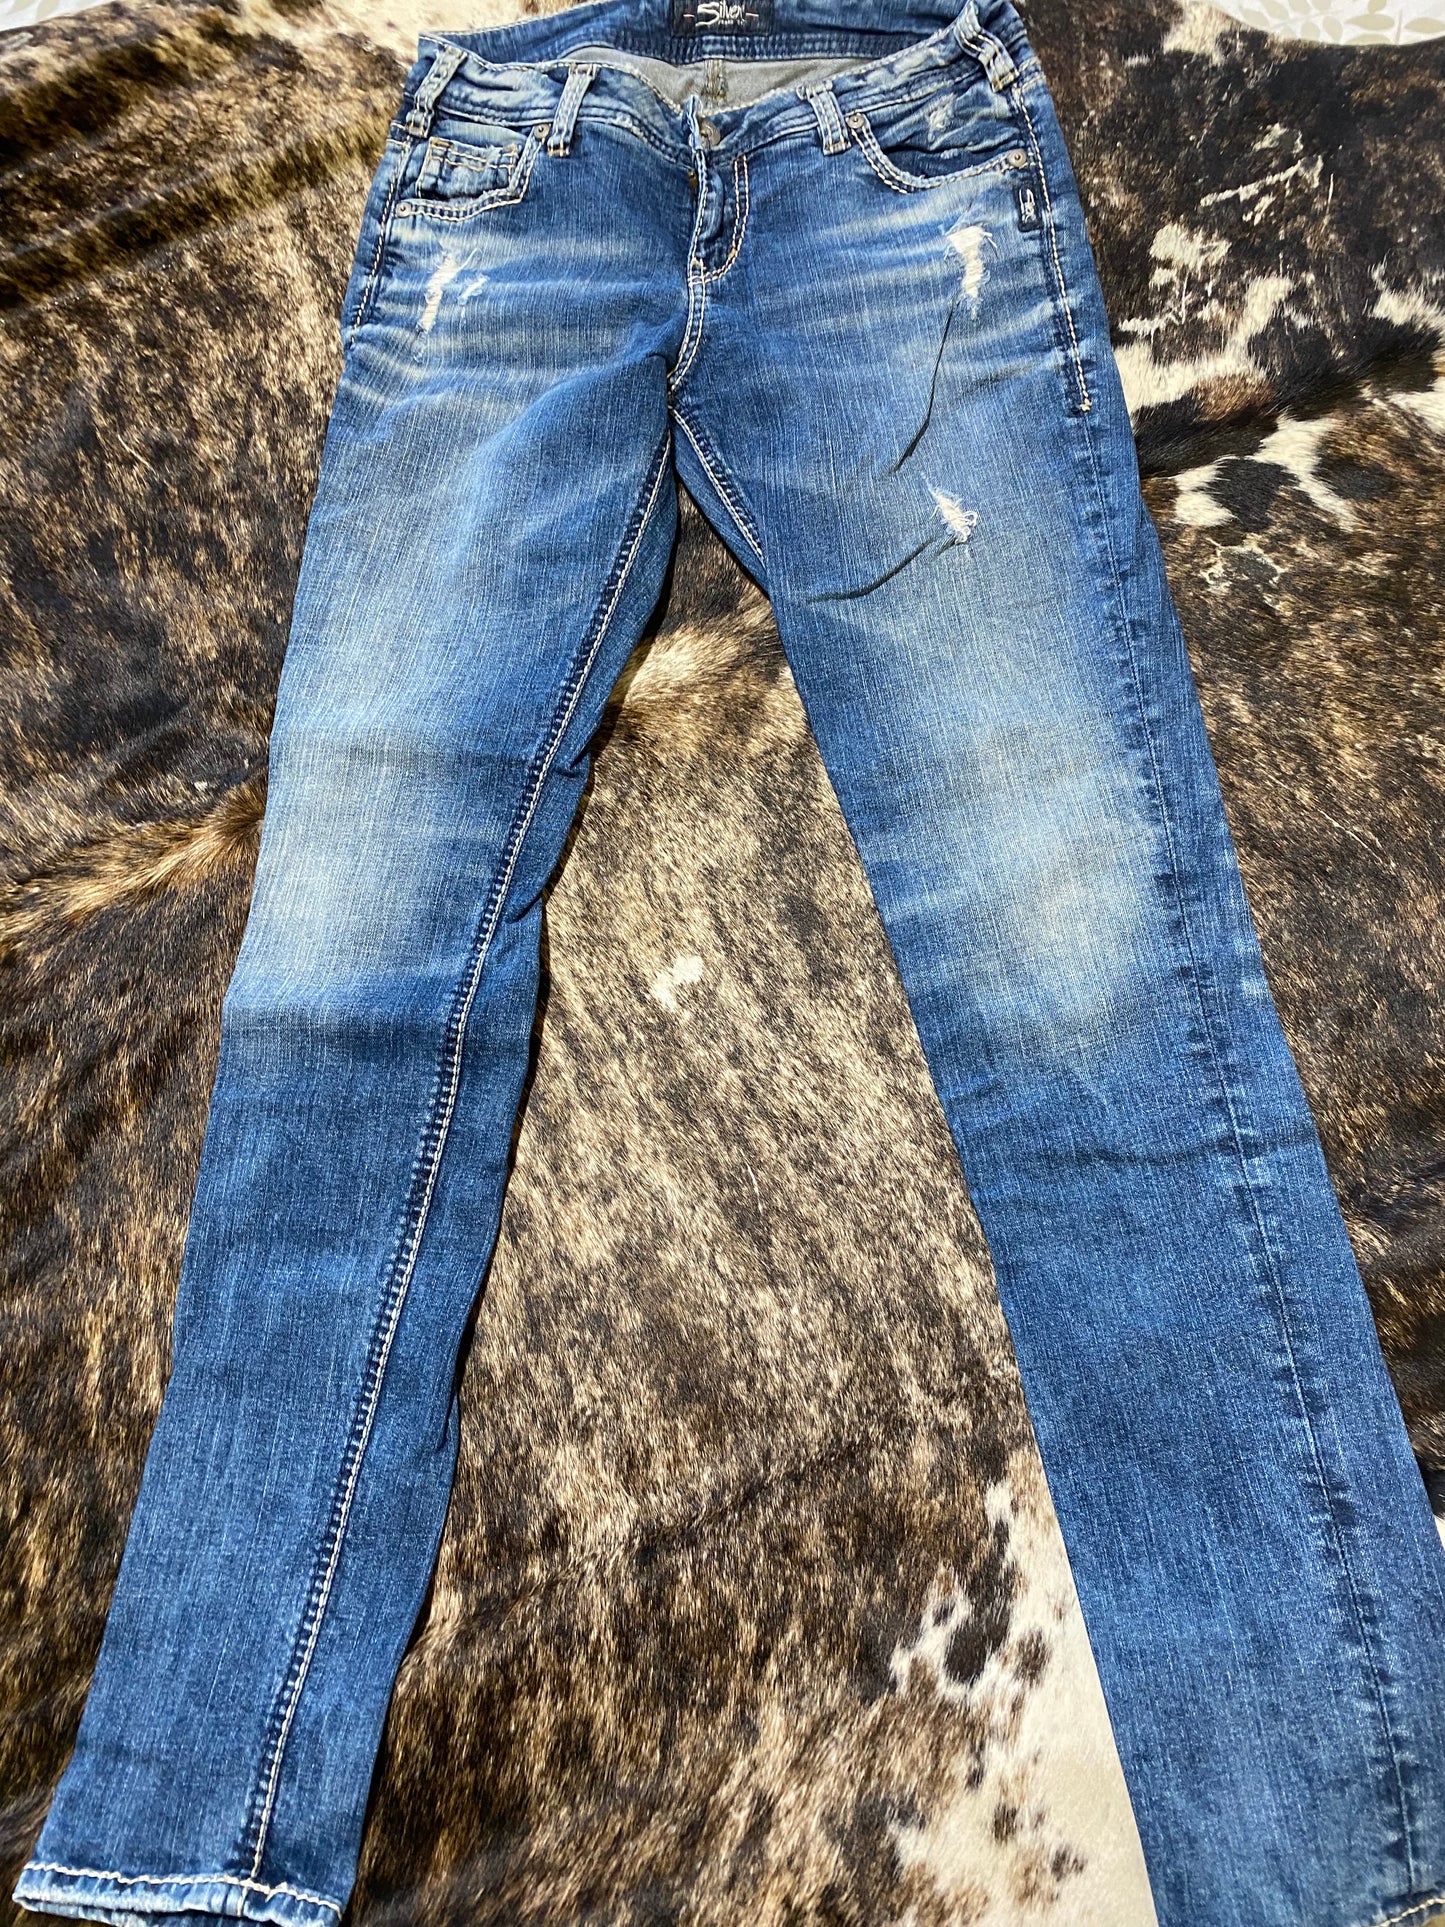 Silver Consignment Jeans